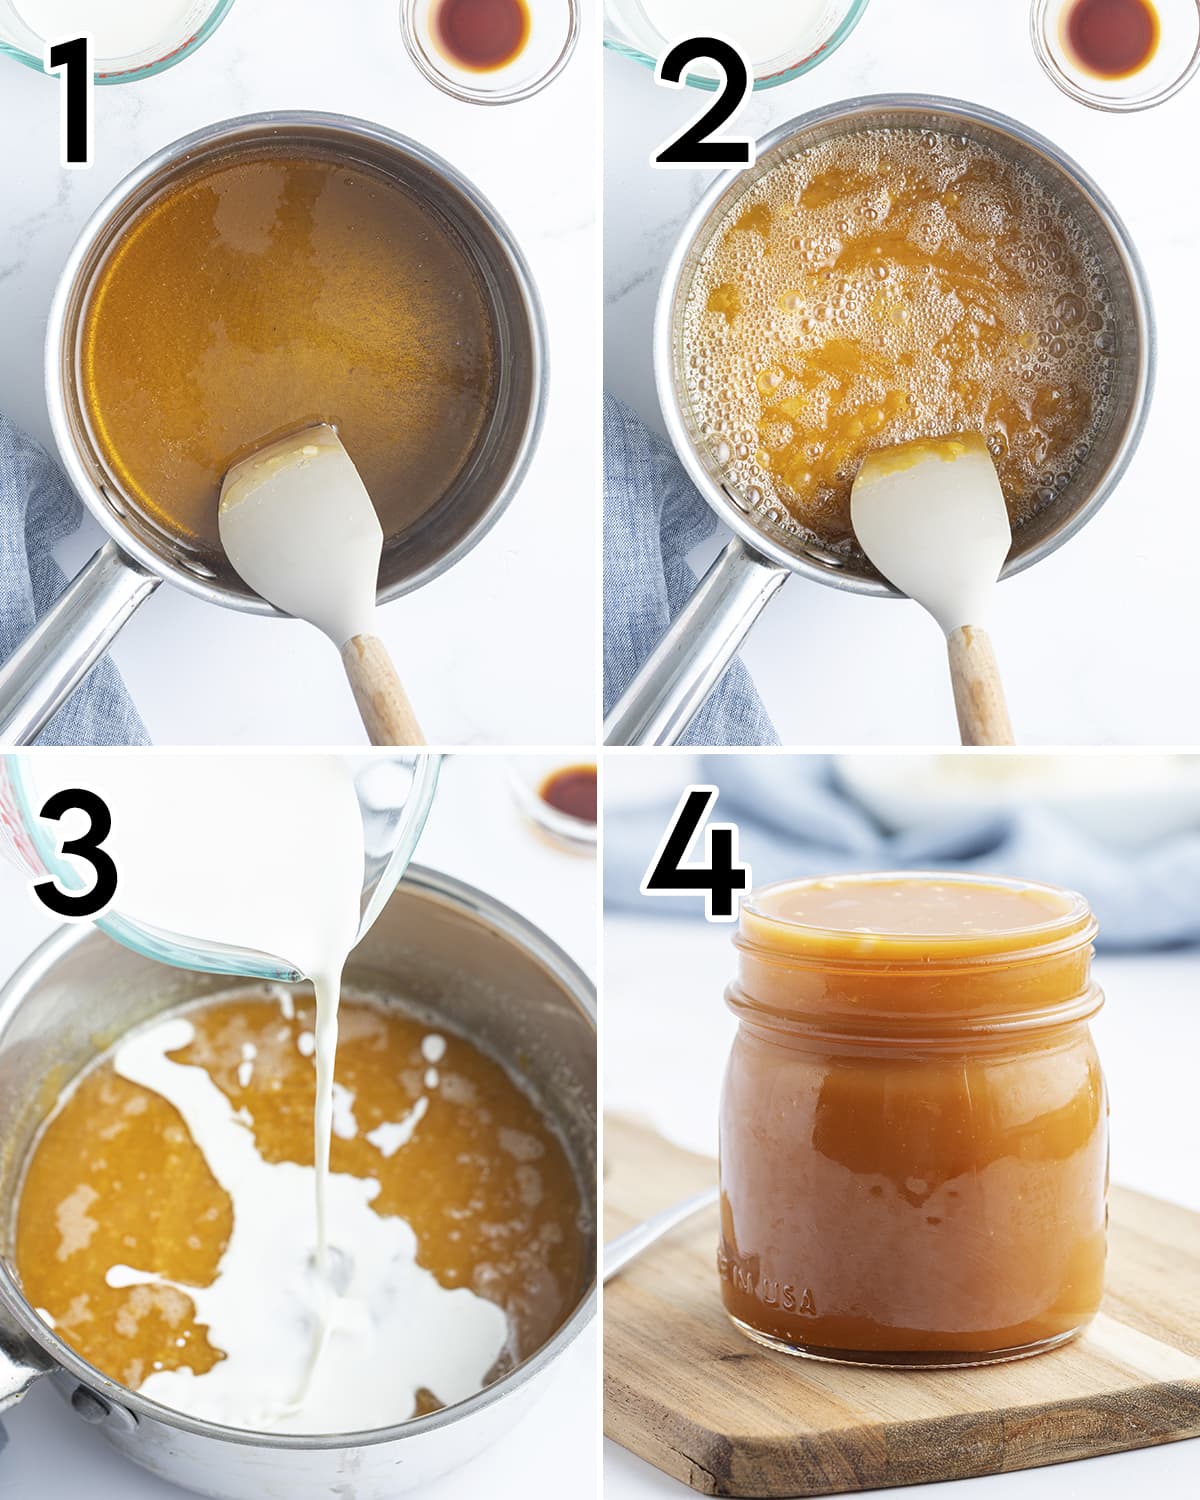 A collage of 4 photos showing how to make salted caramel sauce.